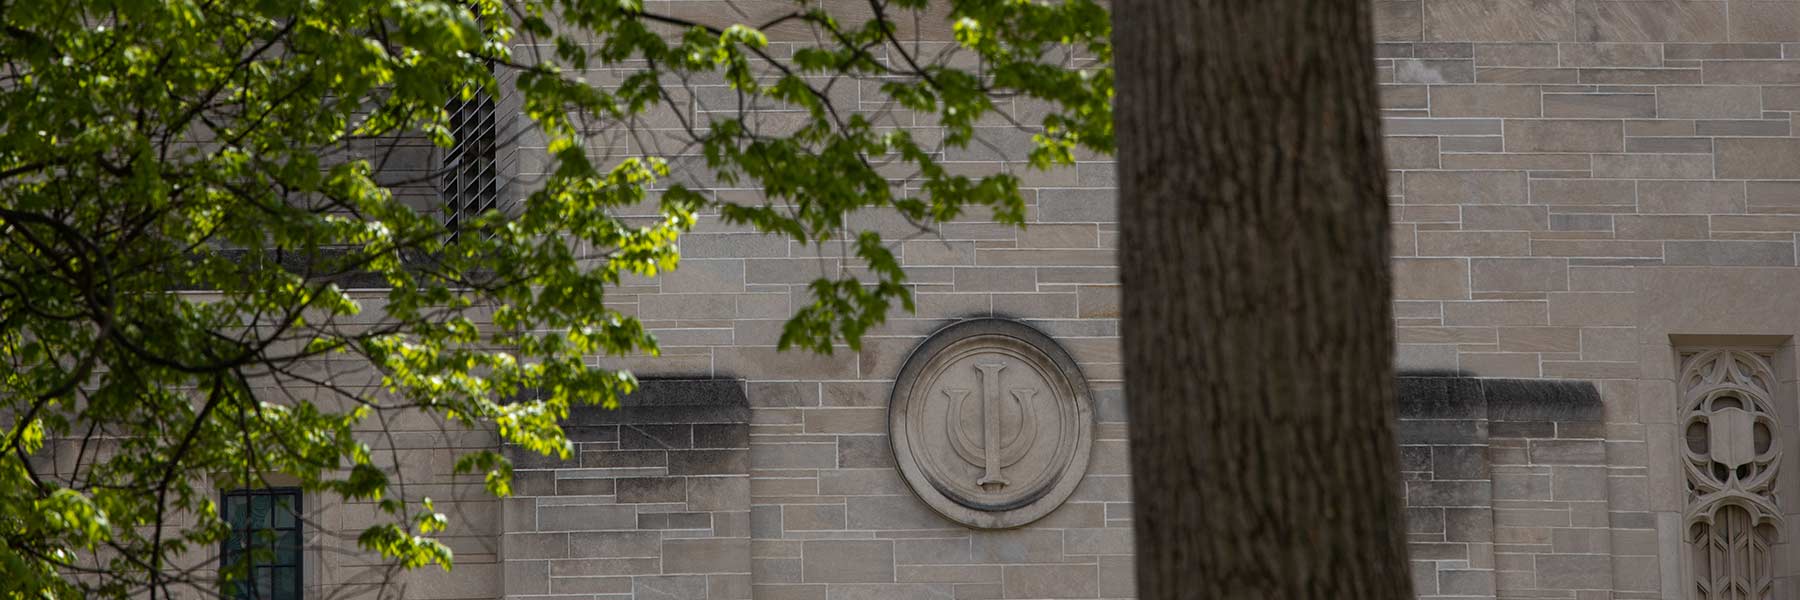 Tree leaves begin to thrive near the IU Auditorium in Spring